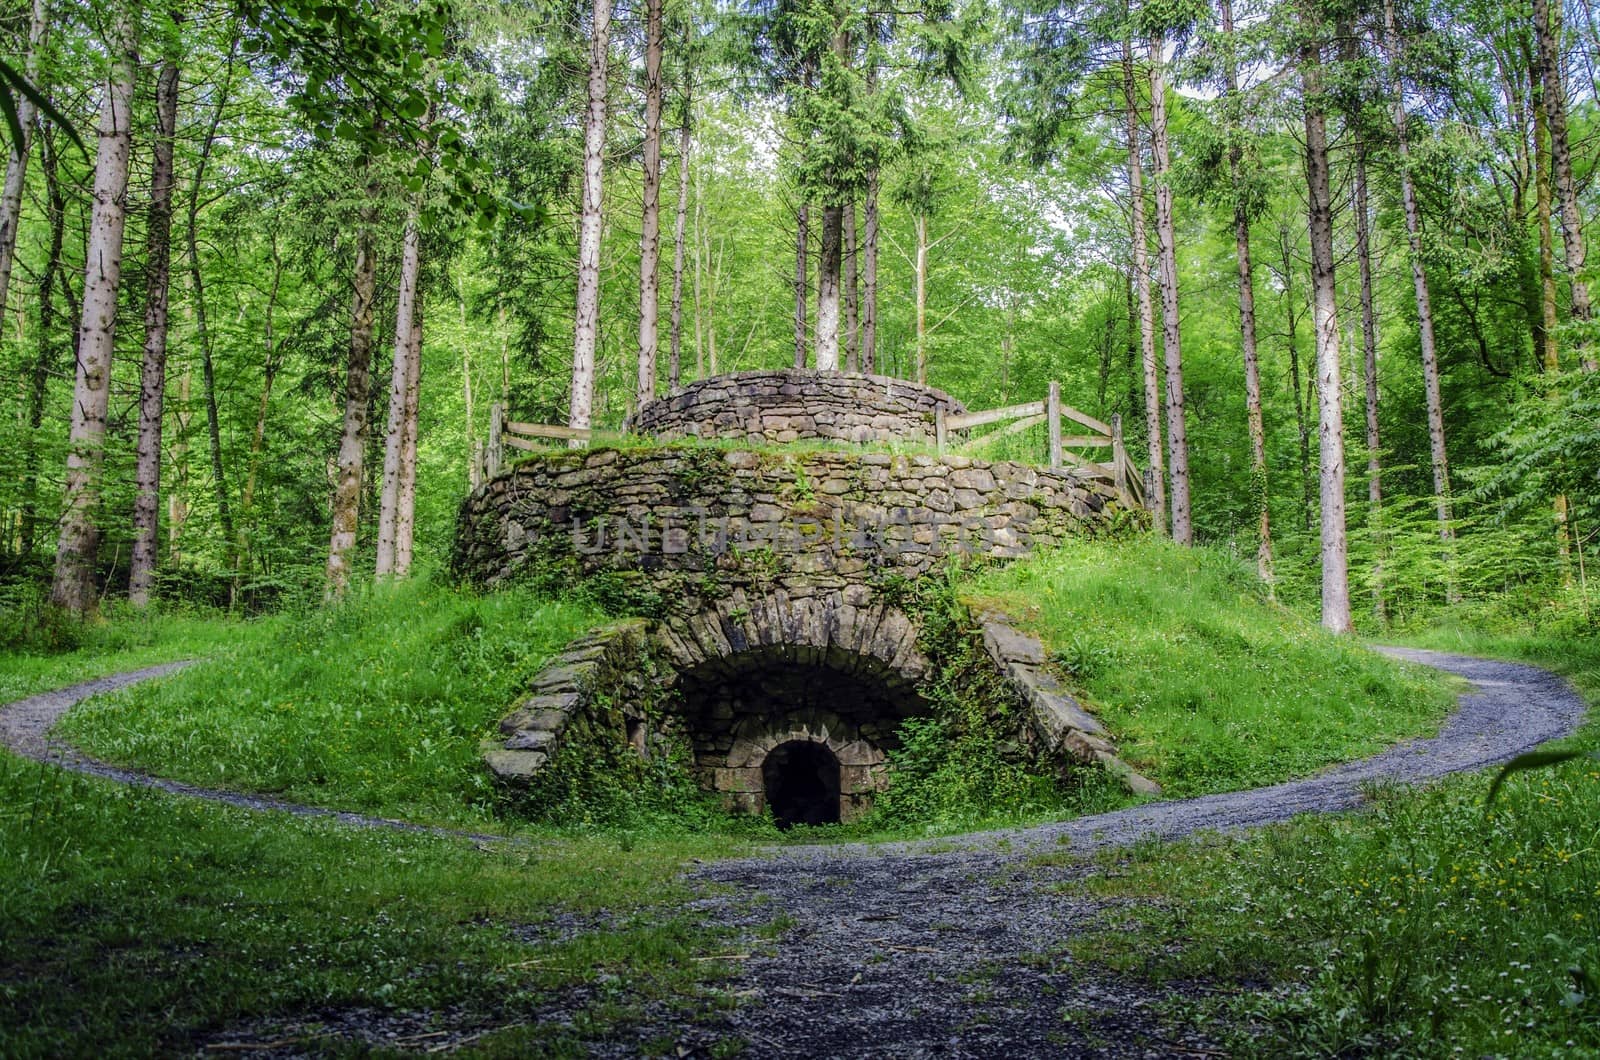 Dome in the forest, with ancient architecture and beautiful environment.